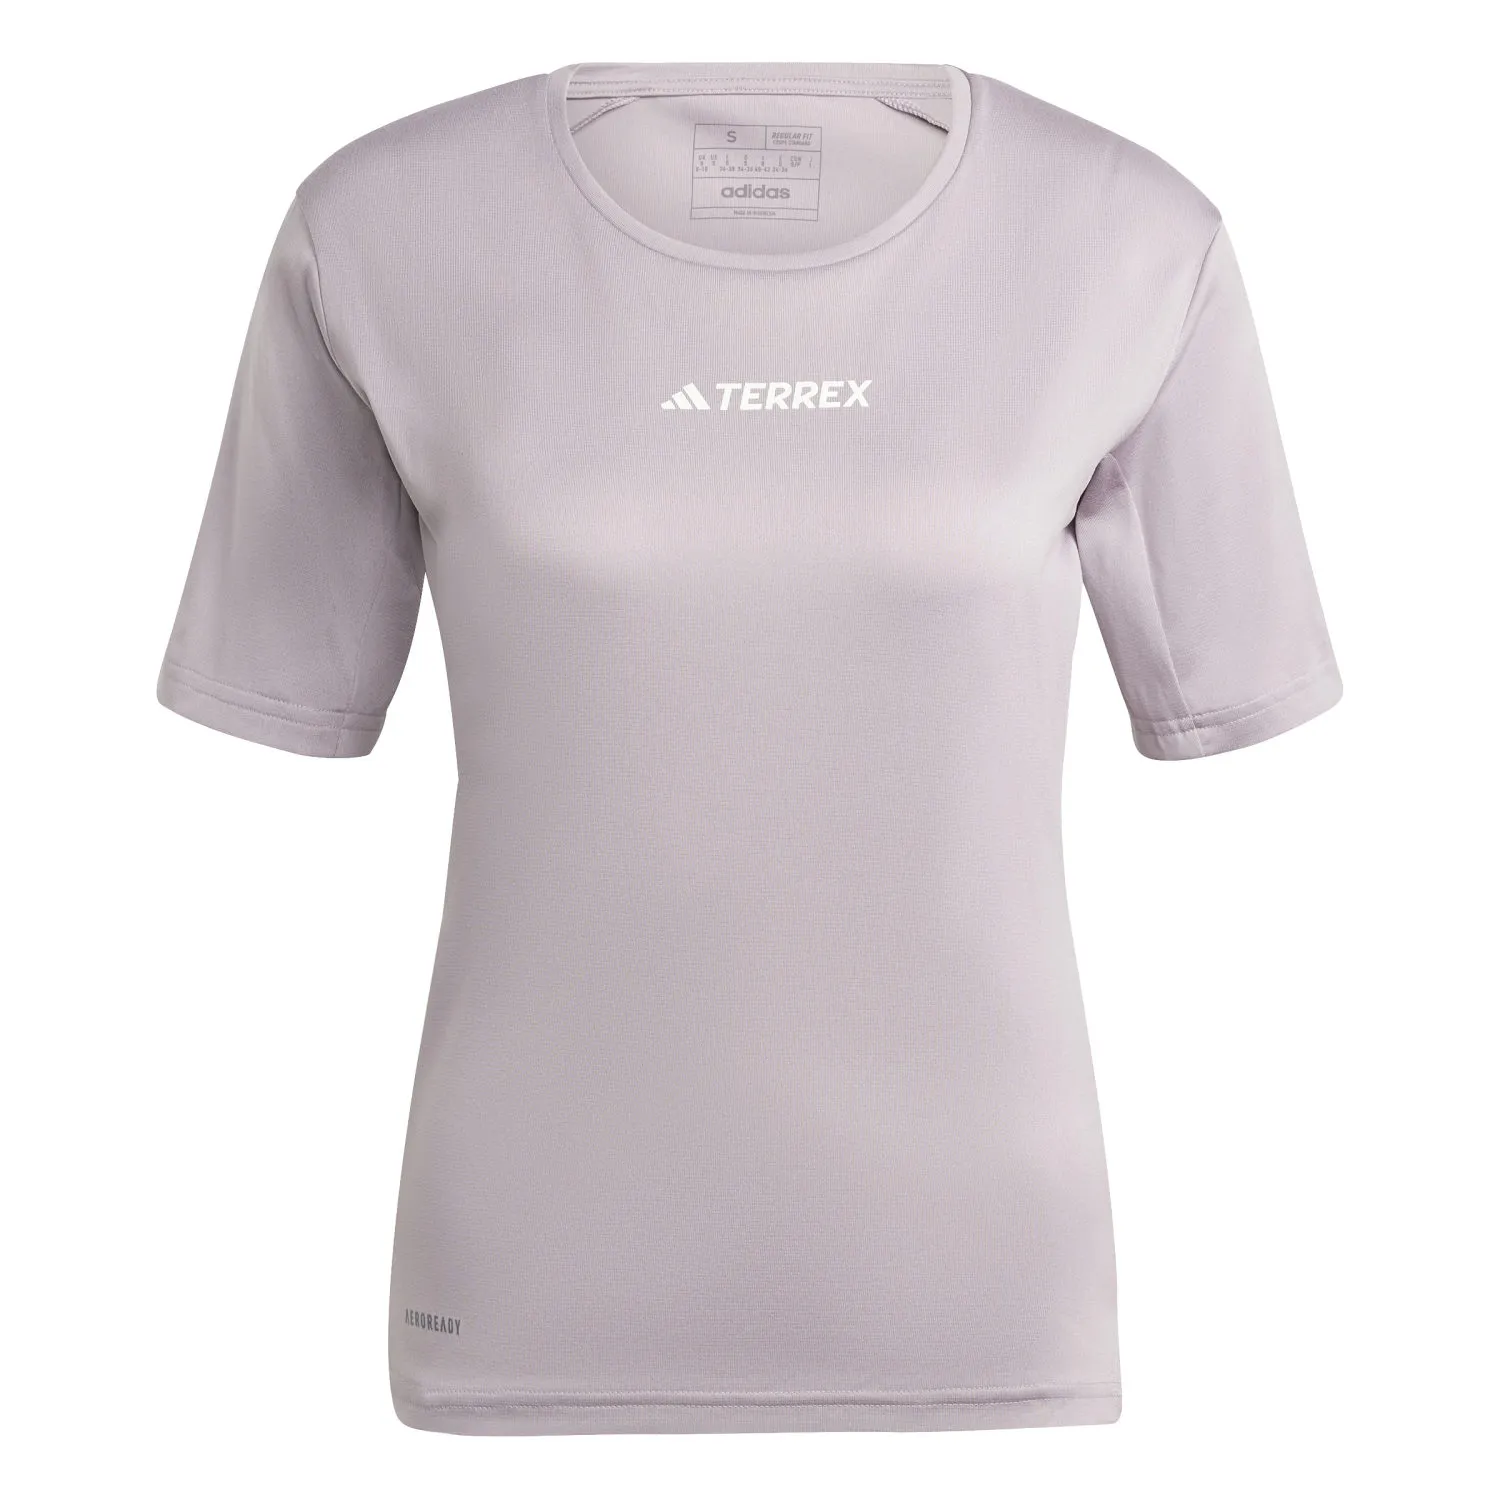 IS0691_1_APPAREL_Photography_Front View_white.jpg